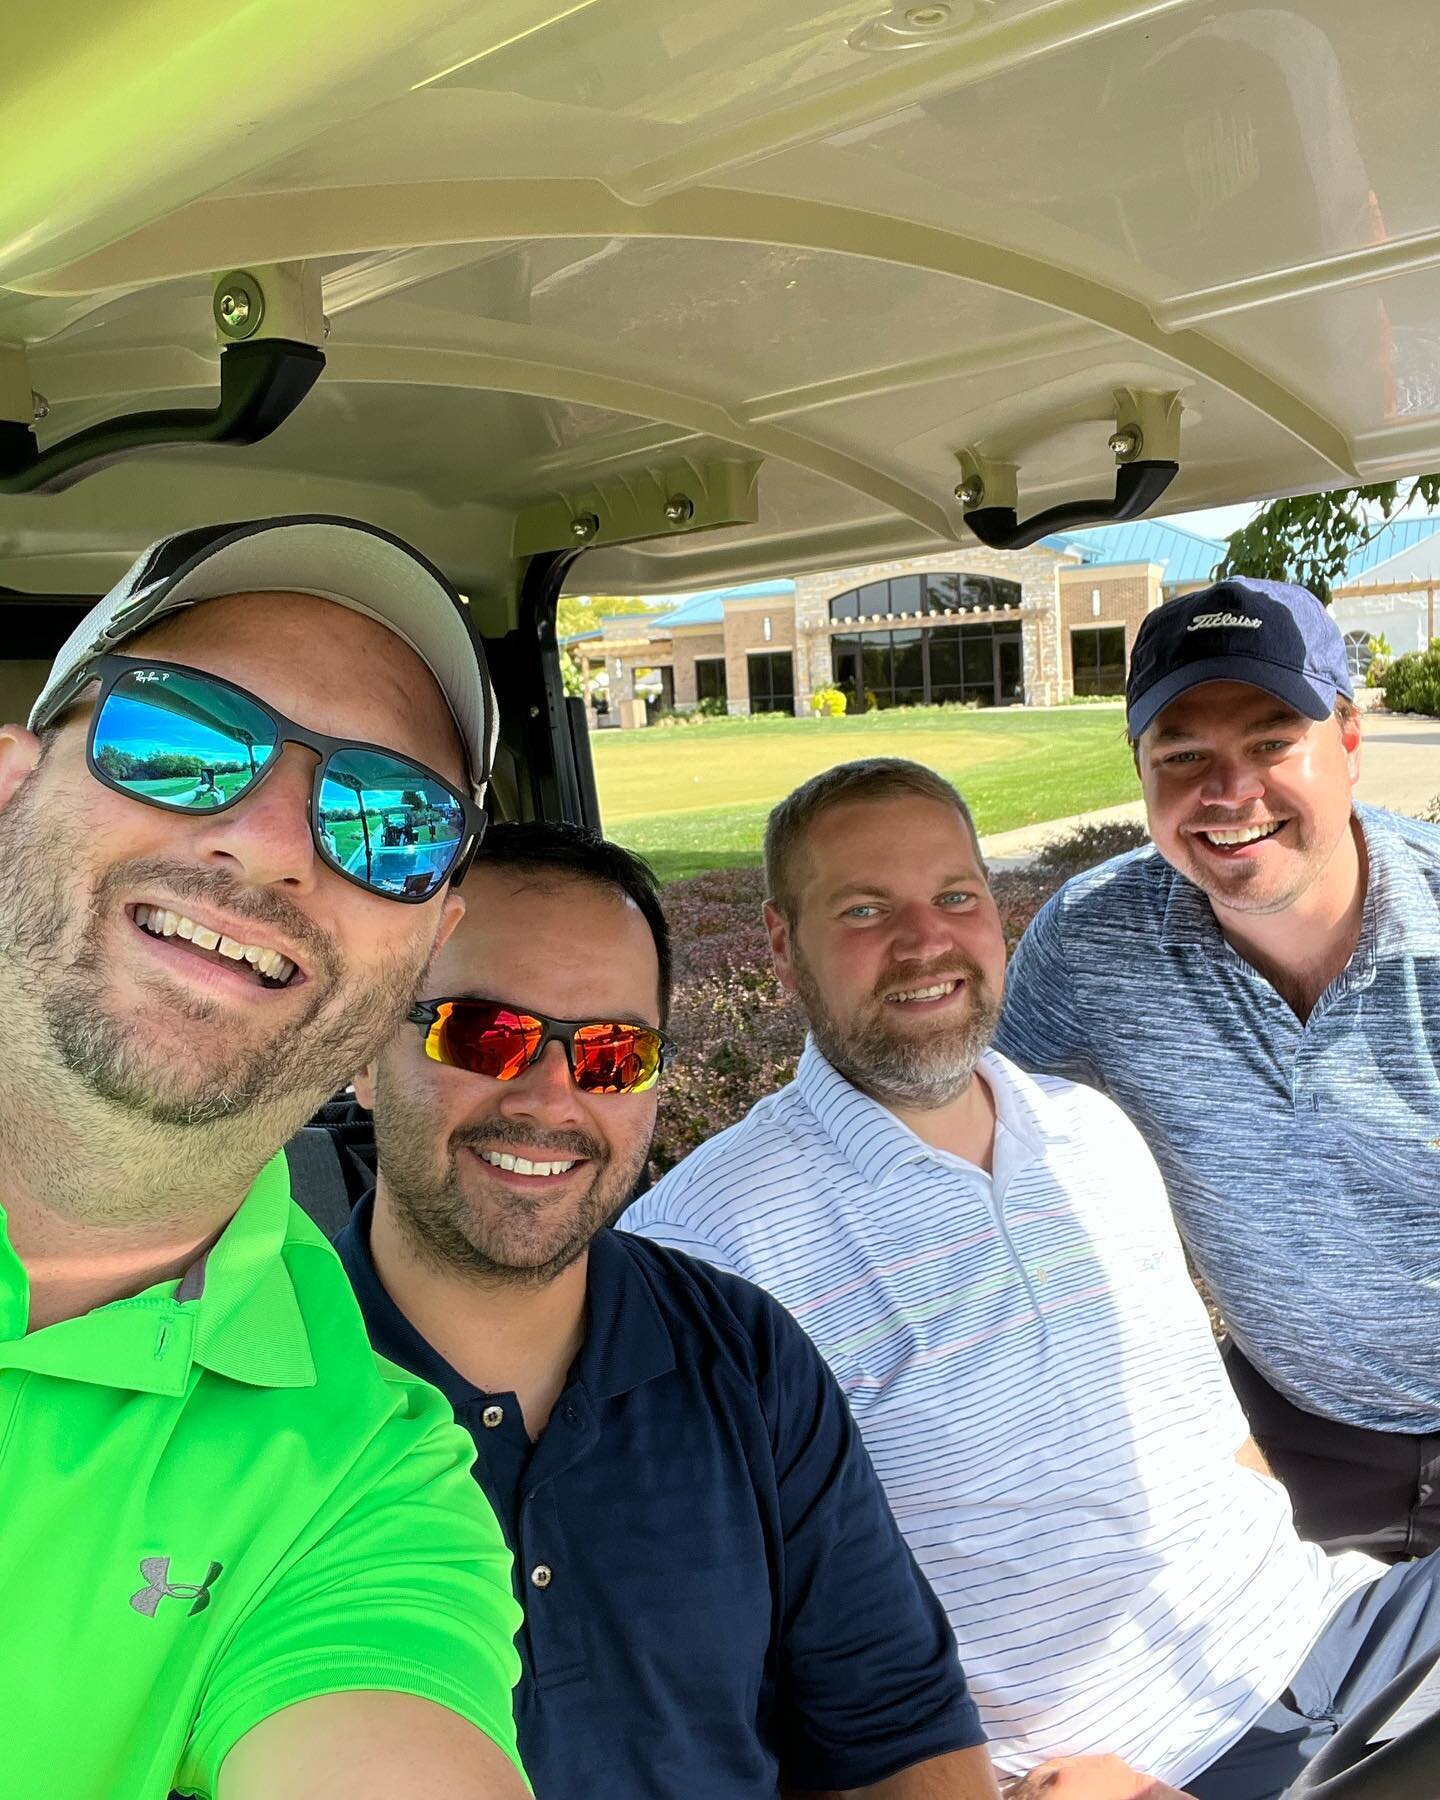 &ldquo;Gender Equality is a human fight, not a female fight&rdquo;. Alliance Companies proudly celebrated Women in Construction &amp; Real Estate by playing in the TW Chicago Women&rsquo;s Cup golf tournament last week! The weather was beautiful and 